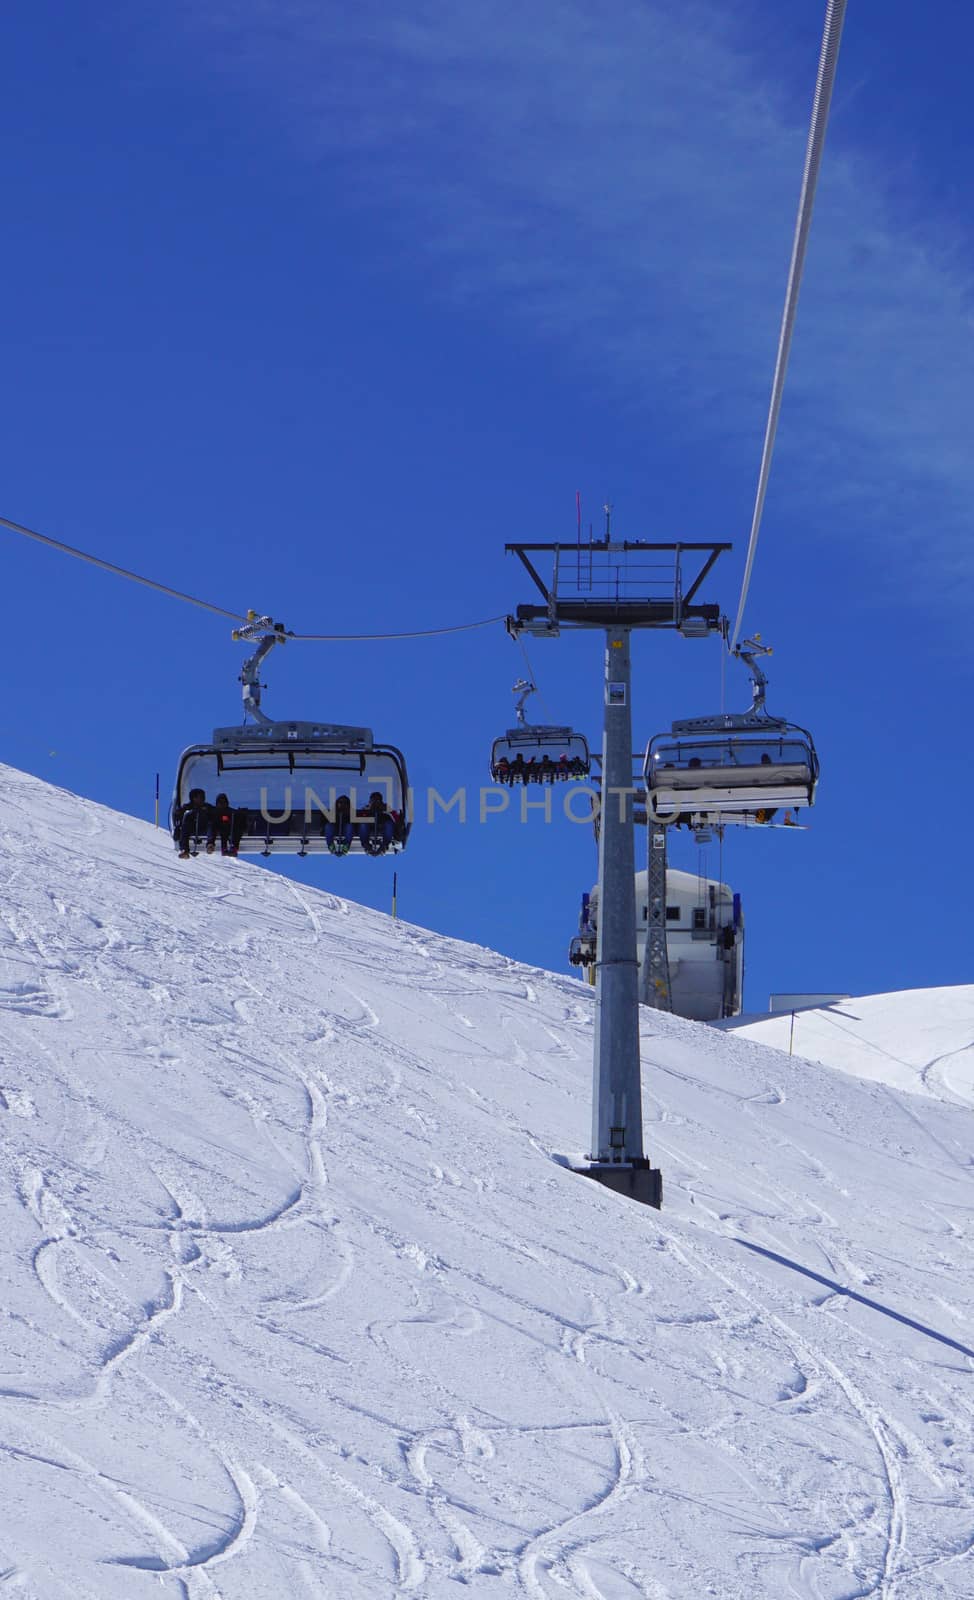 suspended ski cable car at snow mountains Titlis, Engelberg, Switzerland